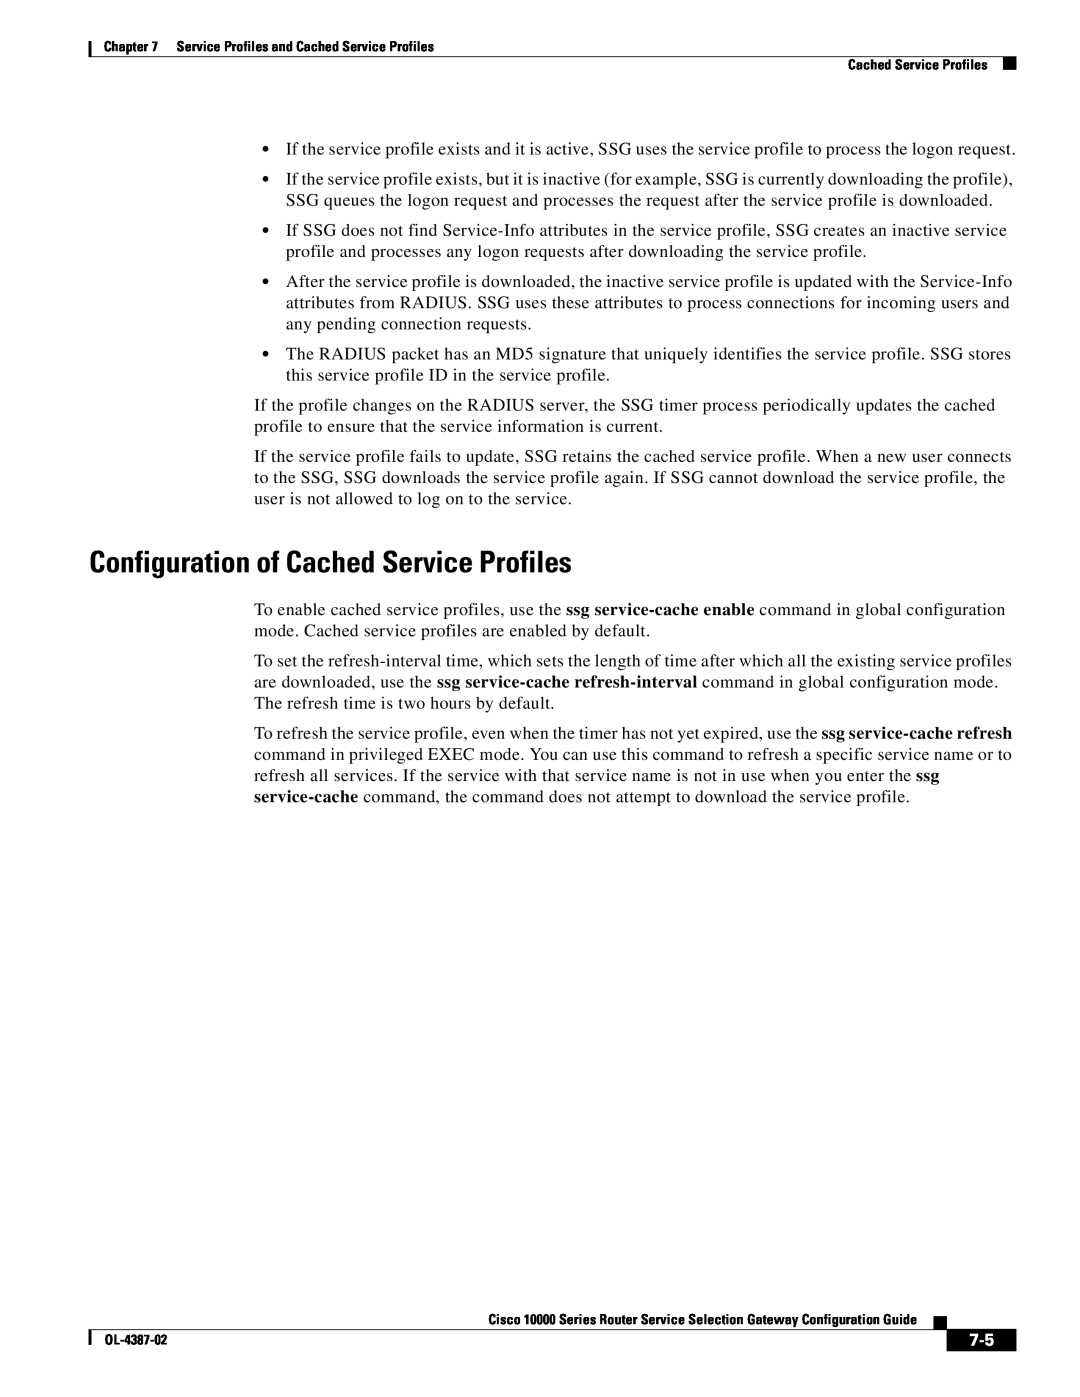 Cisco Systems OL-4387-02 manual Configuration of Cached Service Profiles 